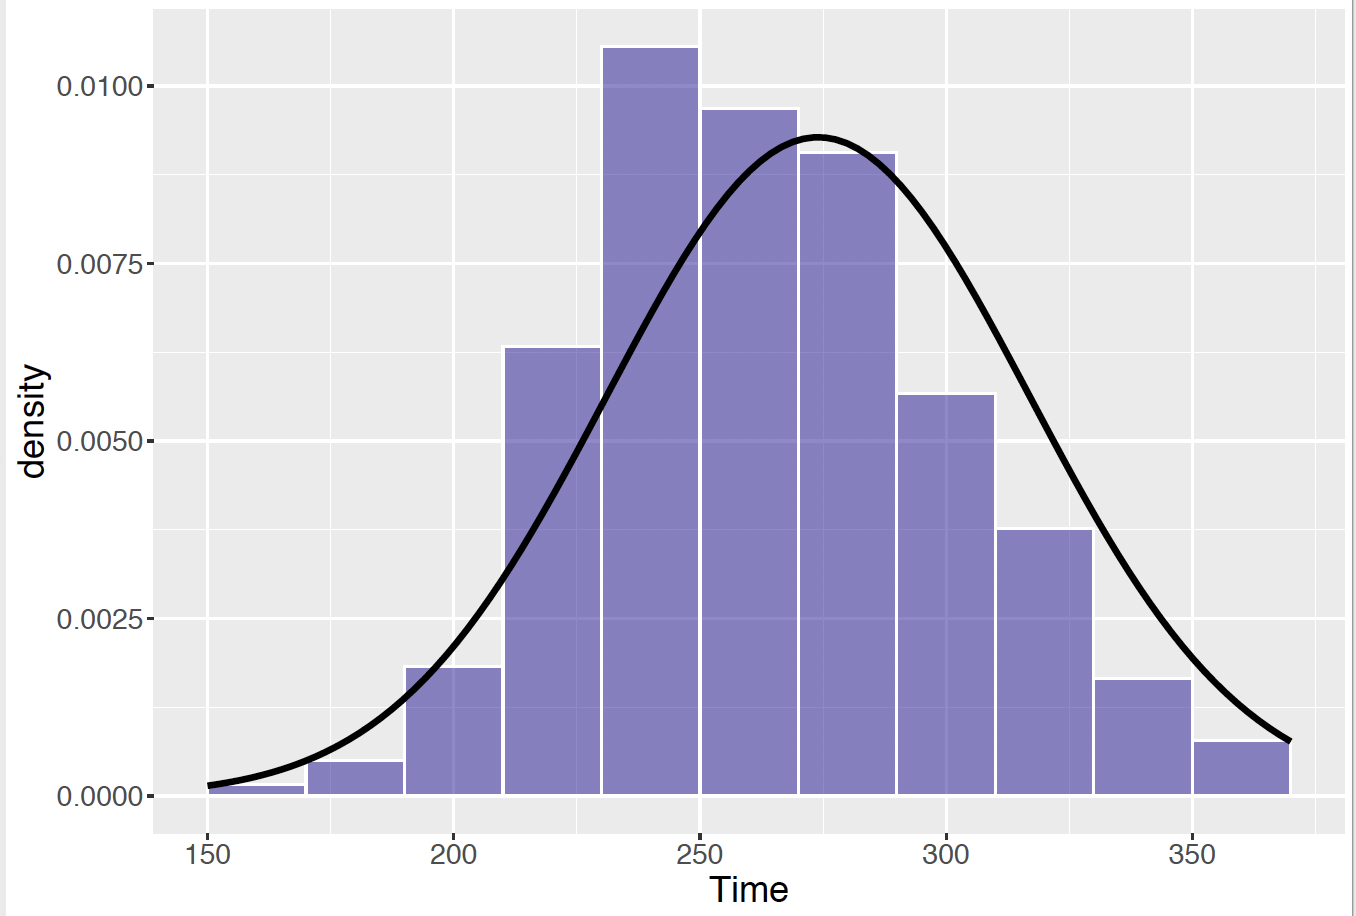 Histogram of women's completion times in the Grandma's Marathon, with a Normal curve on top.